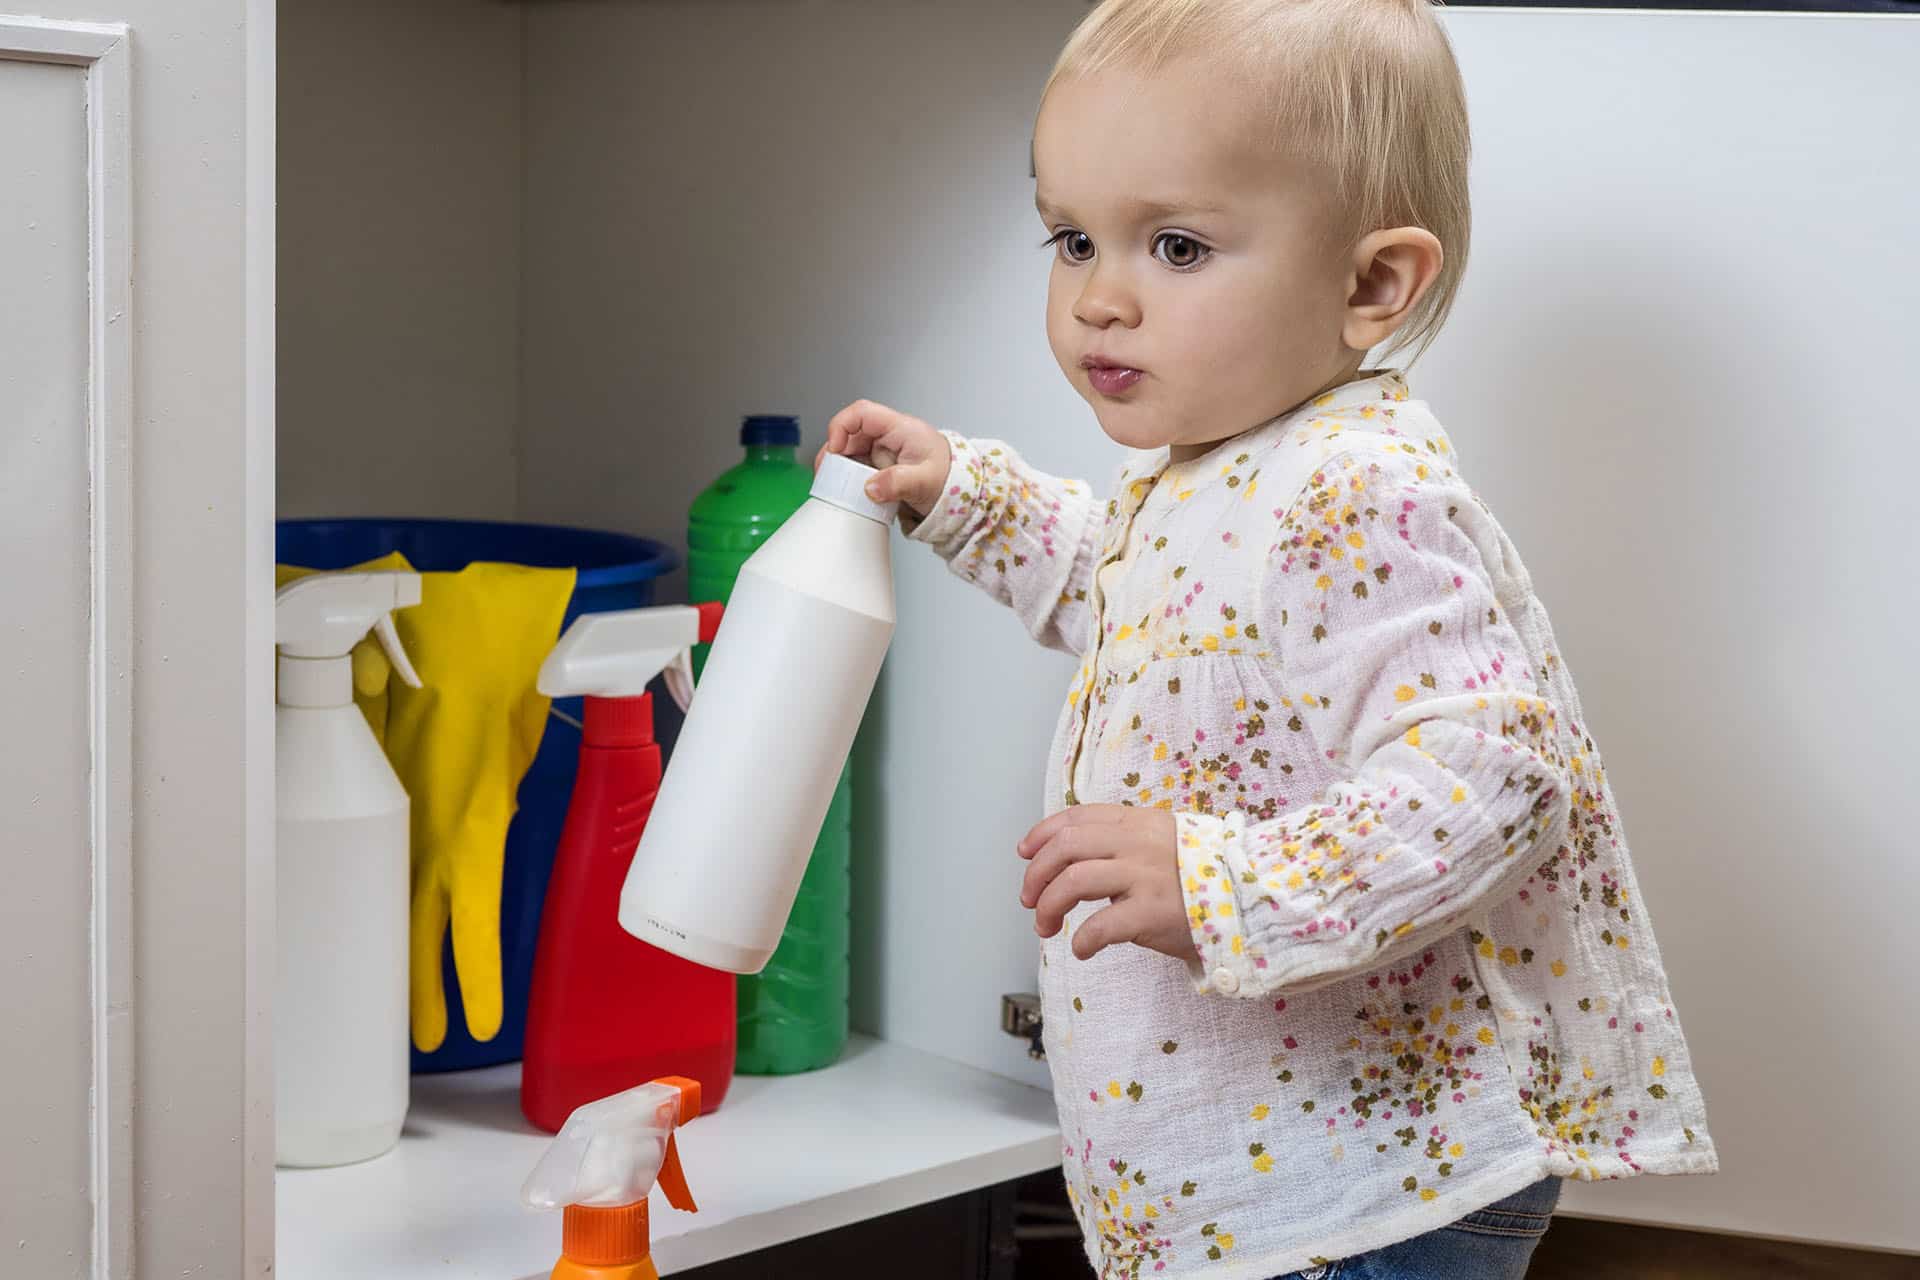 Toddler playing with household cleaners at home